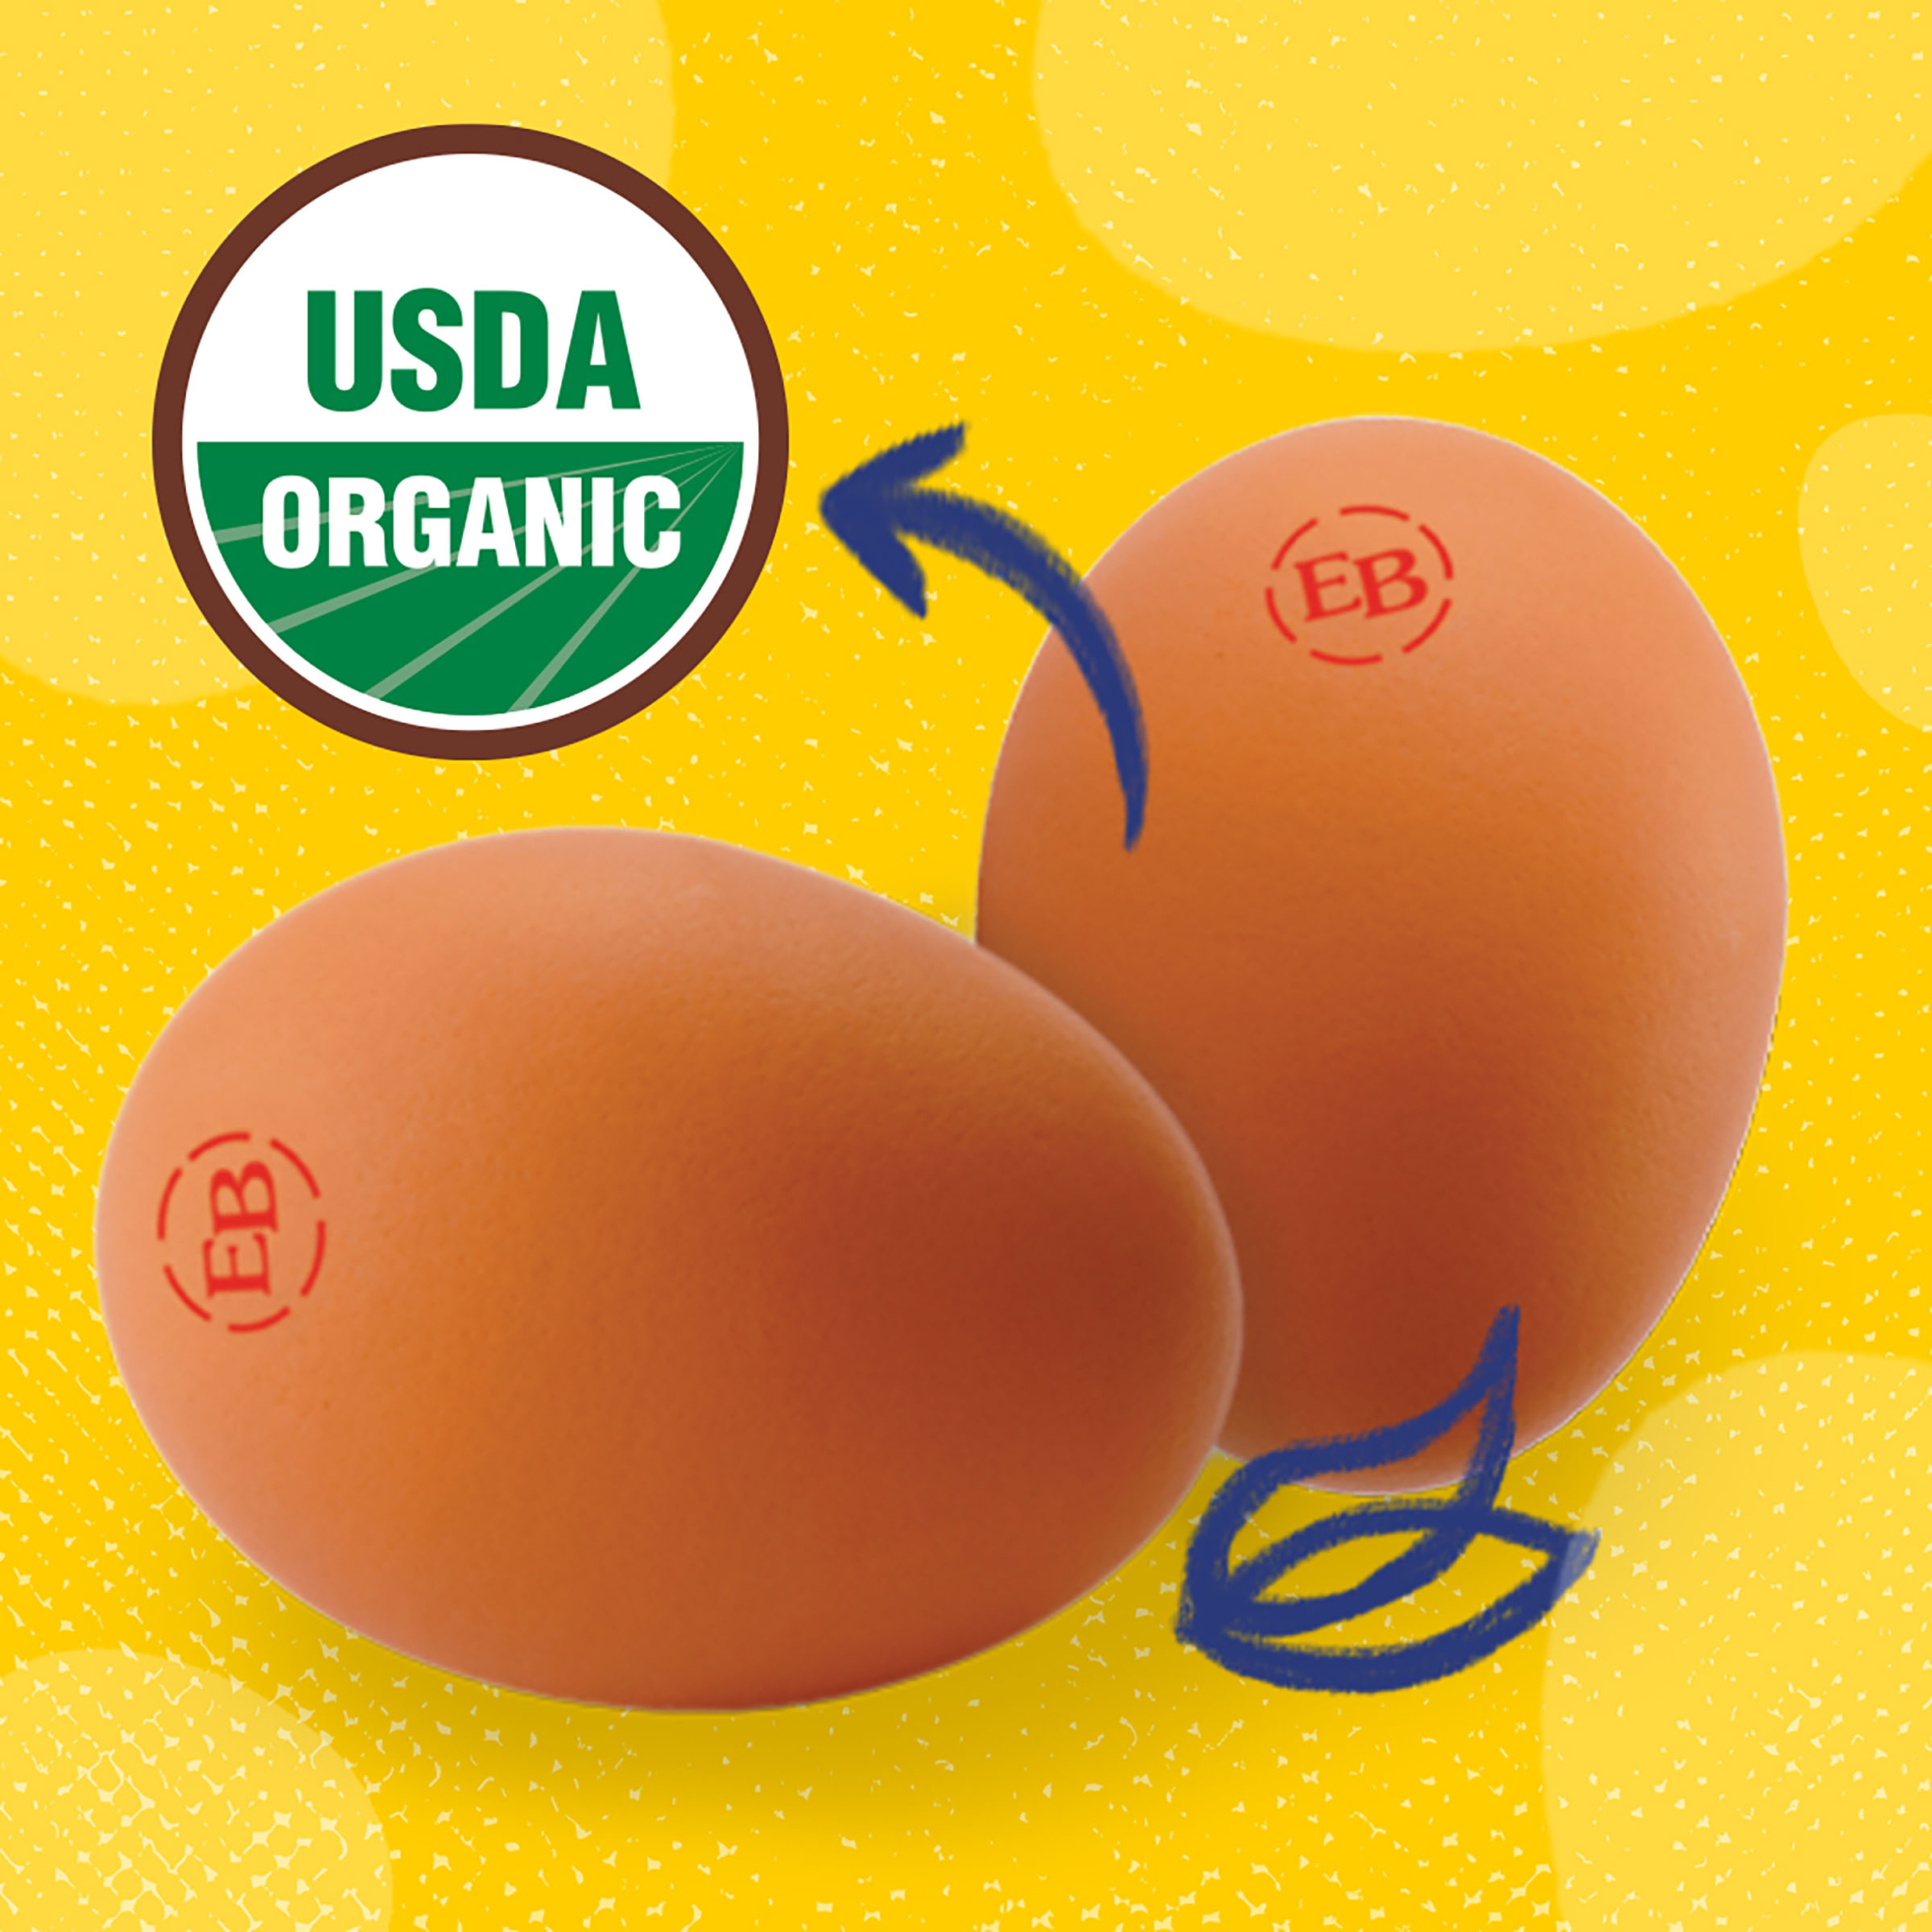 Eggland's Best 100% USDA Organic Certified Large Brown Eggs, 12 count - image 4 of 16